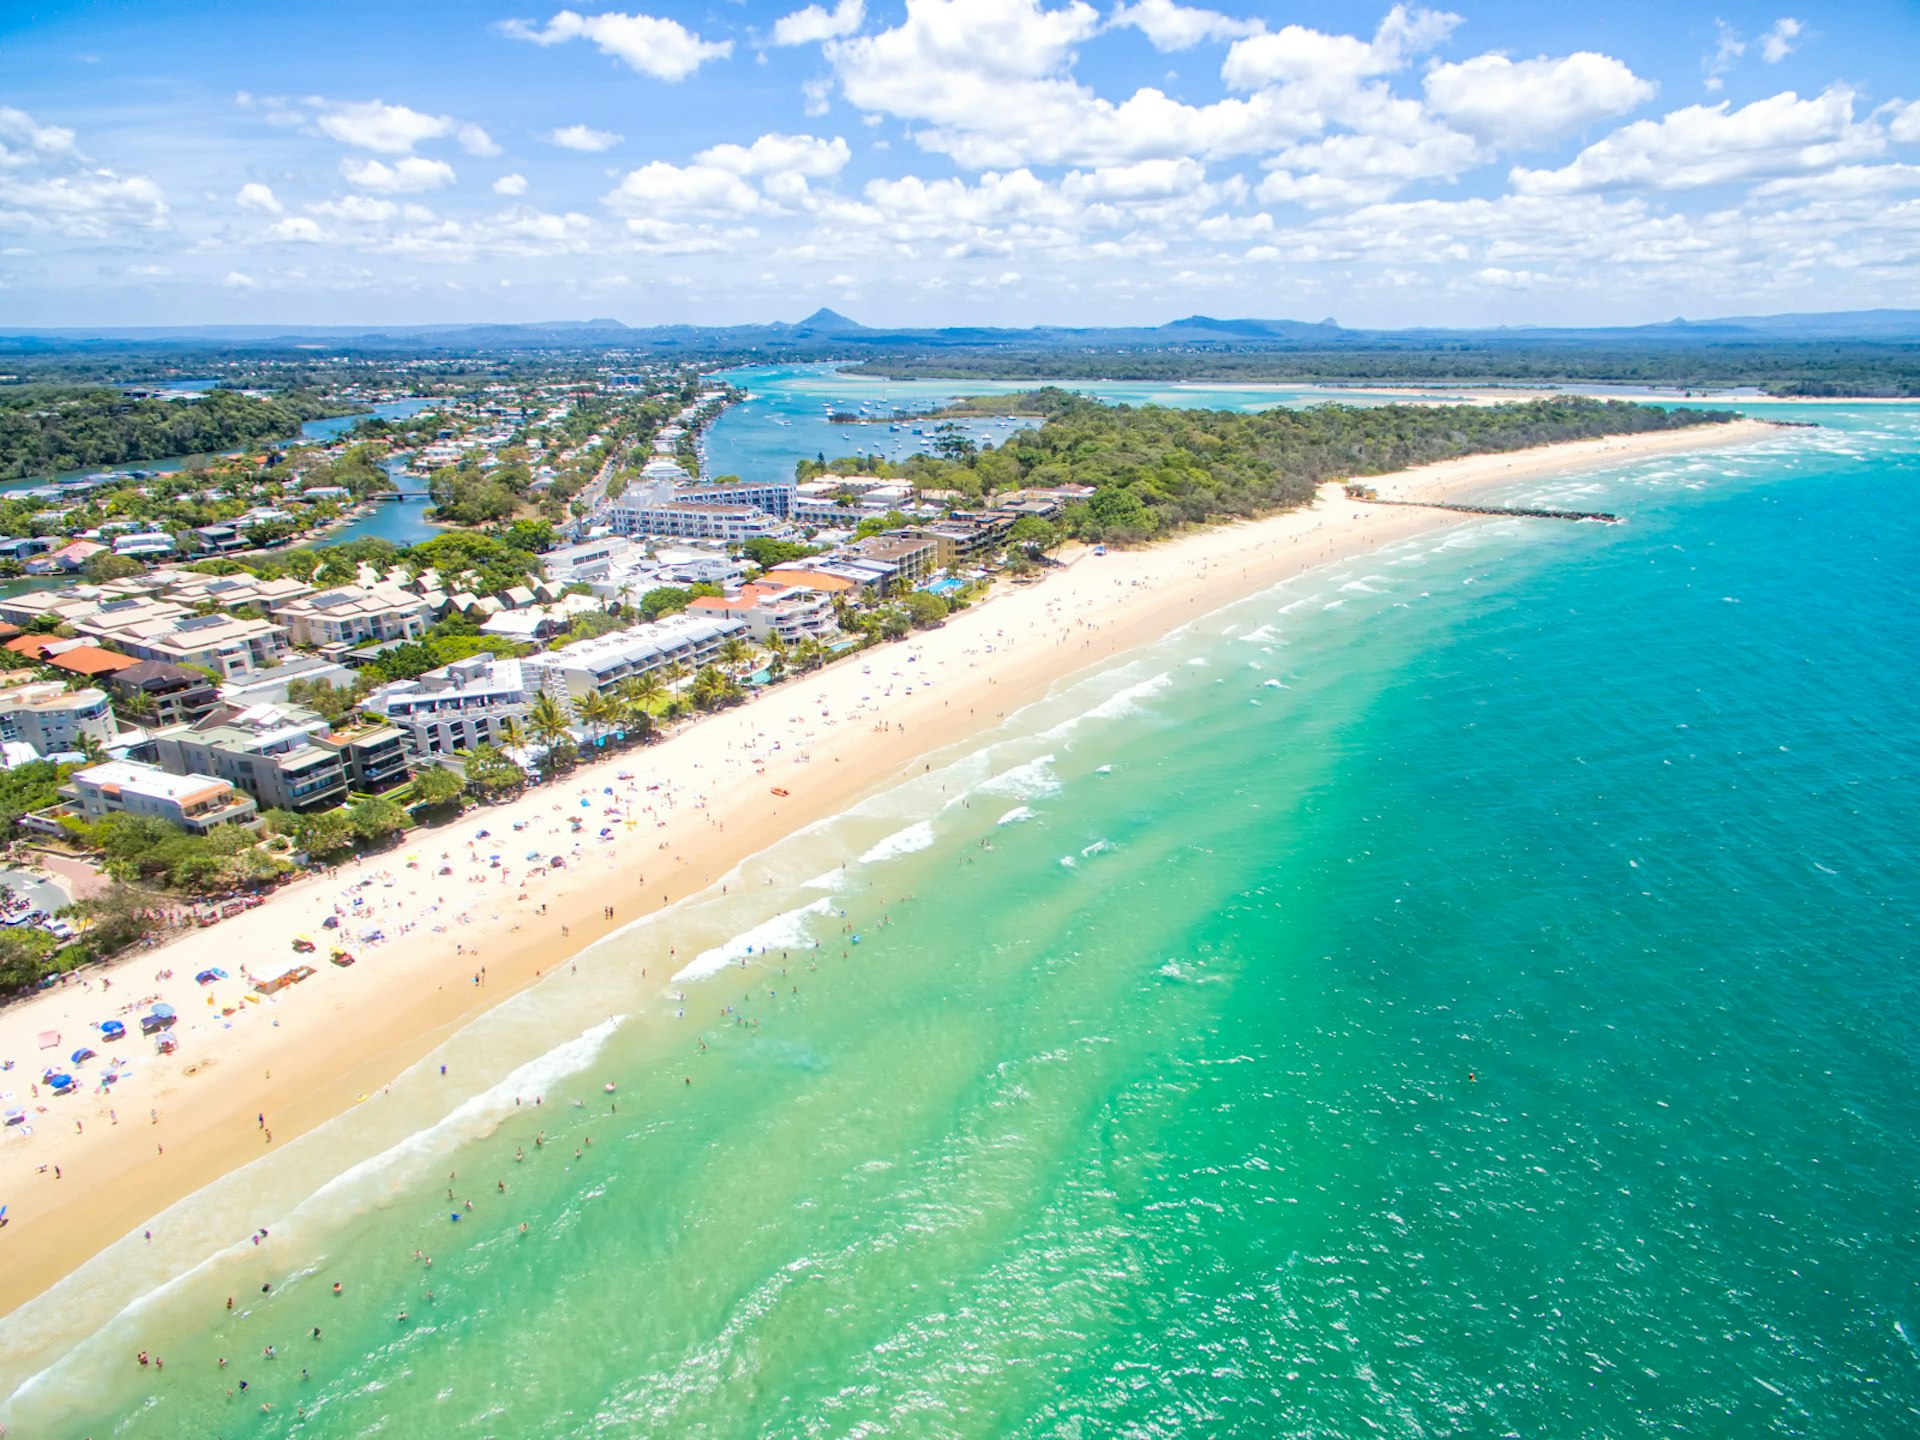 An aerial view of Noosa beach with views over the waterfront buildings behind